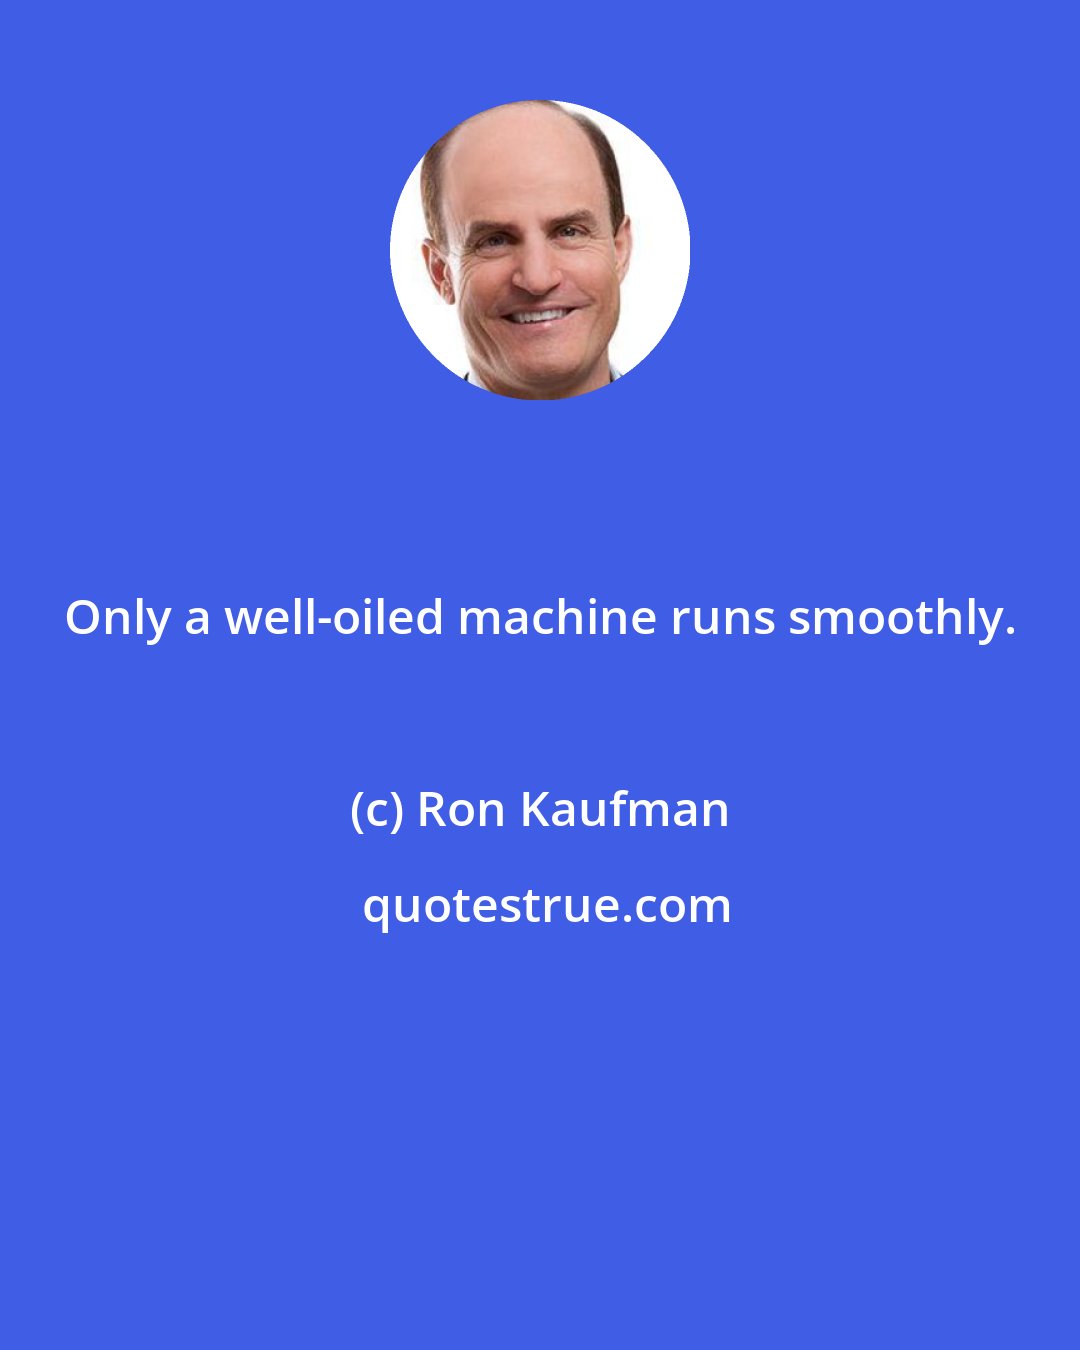 Ron Kaufman: Only a well-oiled machine runs smoothly.